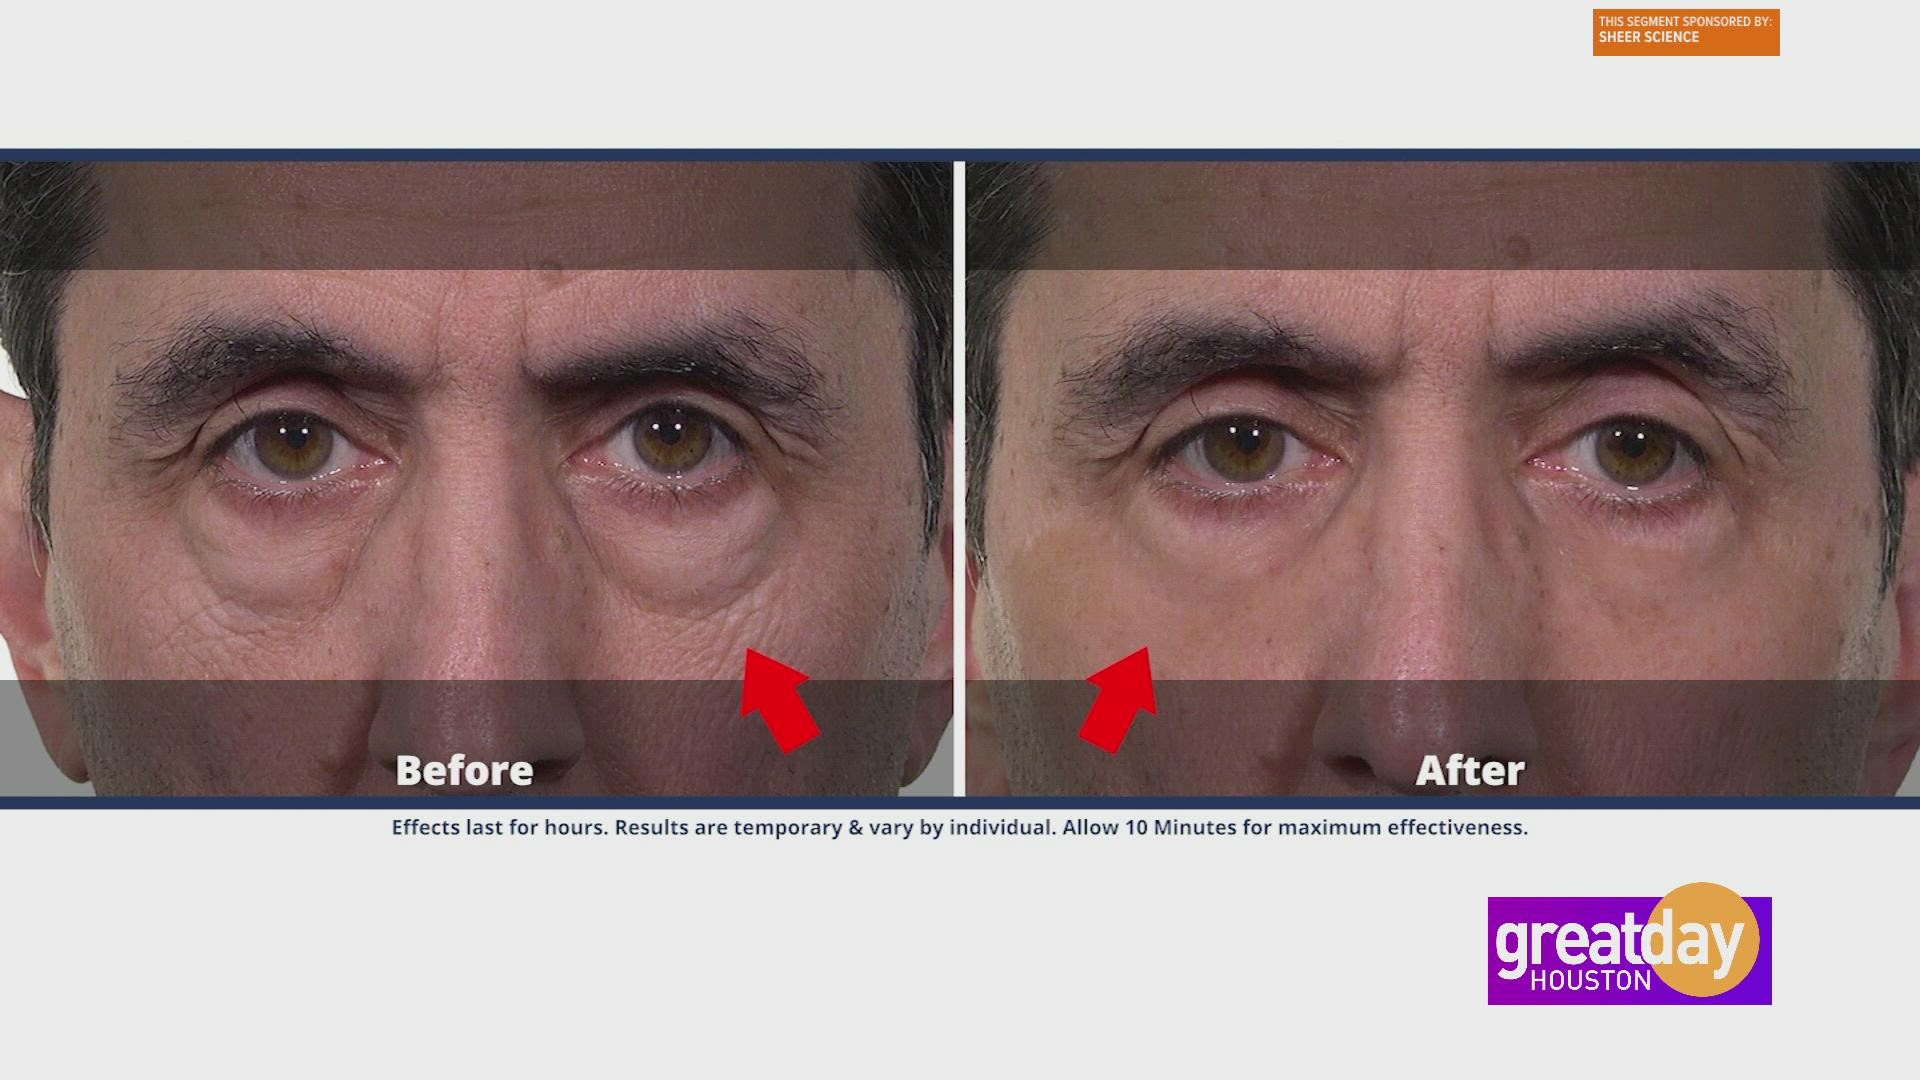 Plexaderm eliminates under-eye bags and face lines in less than 10 minutes.